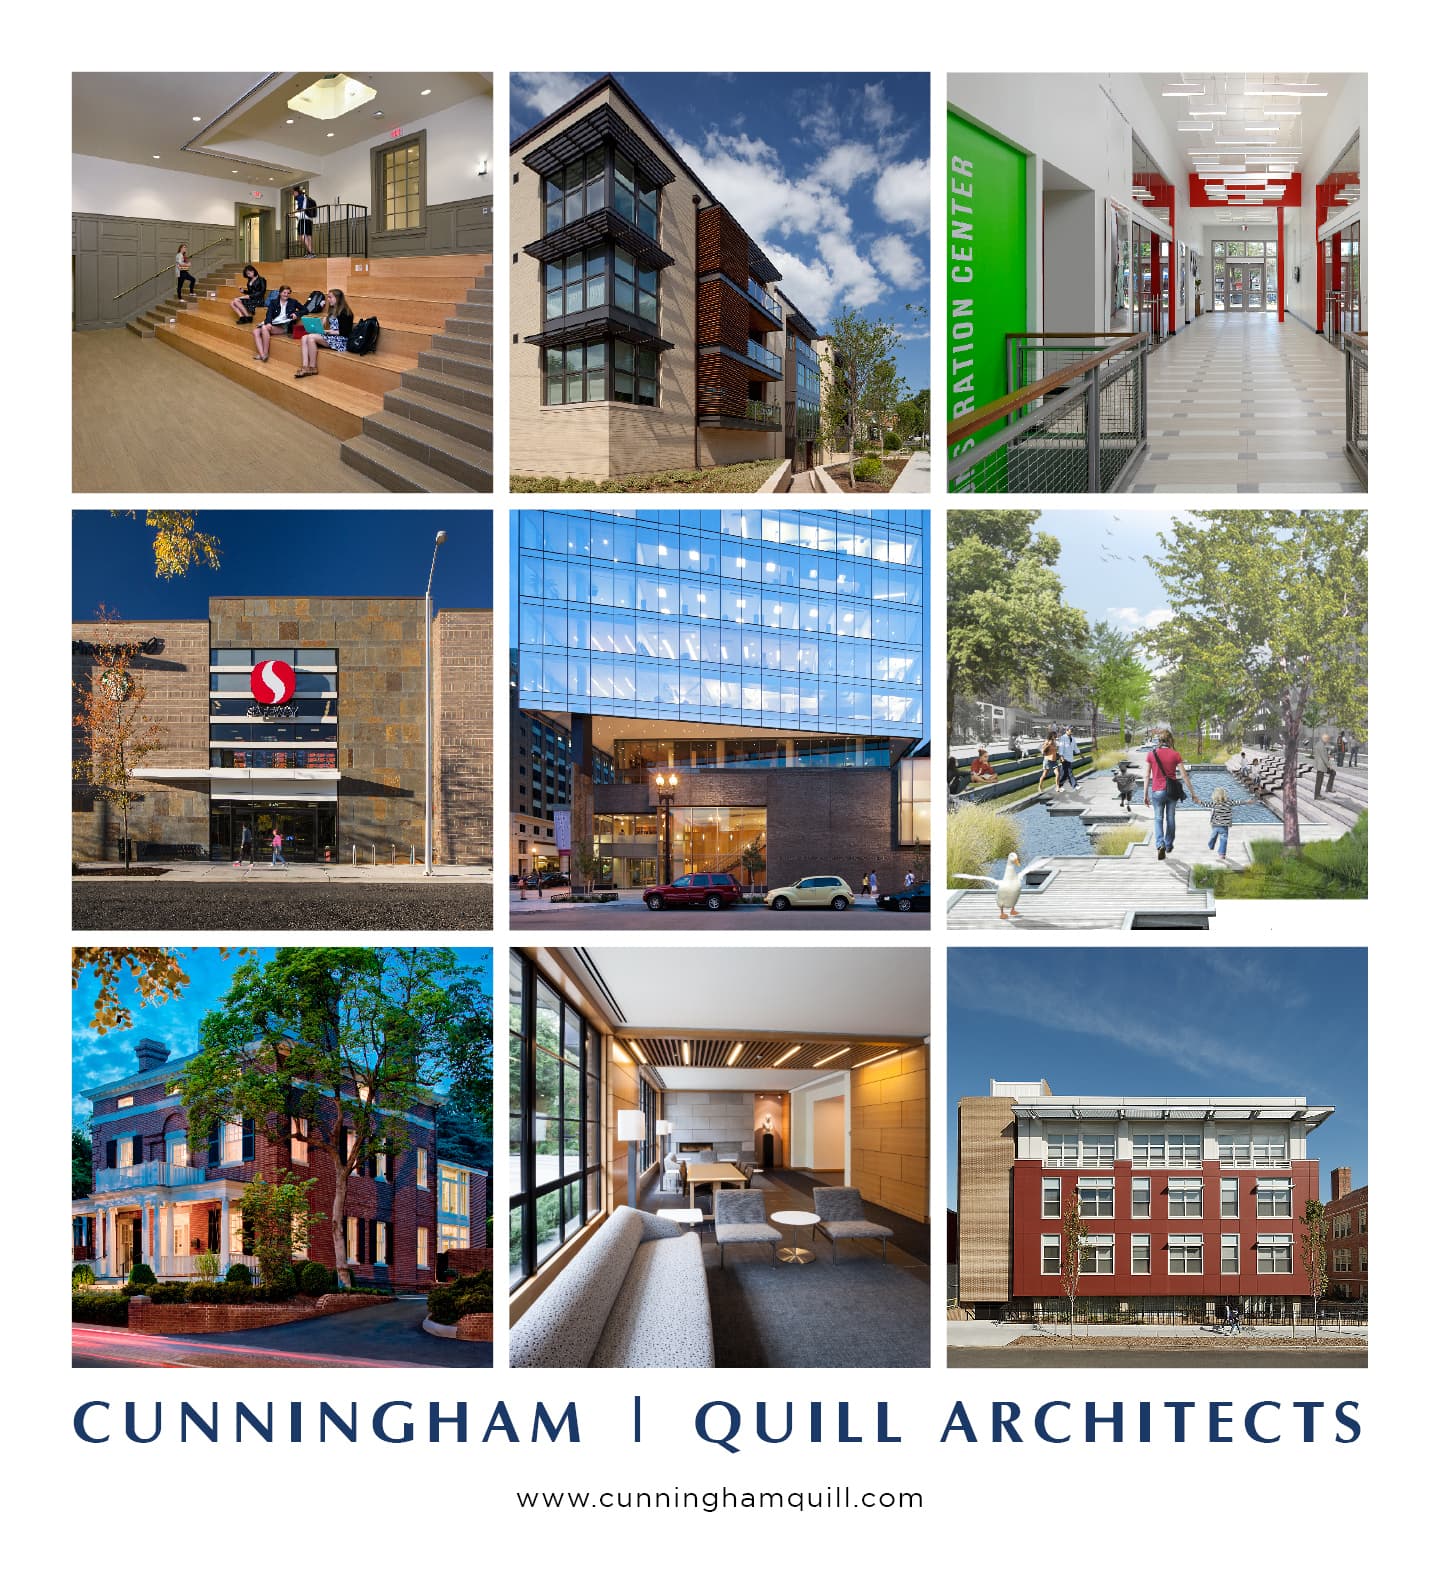 Cunningham | Quill Architects PLLC